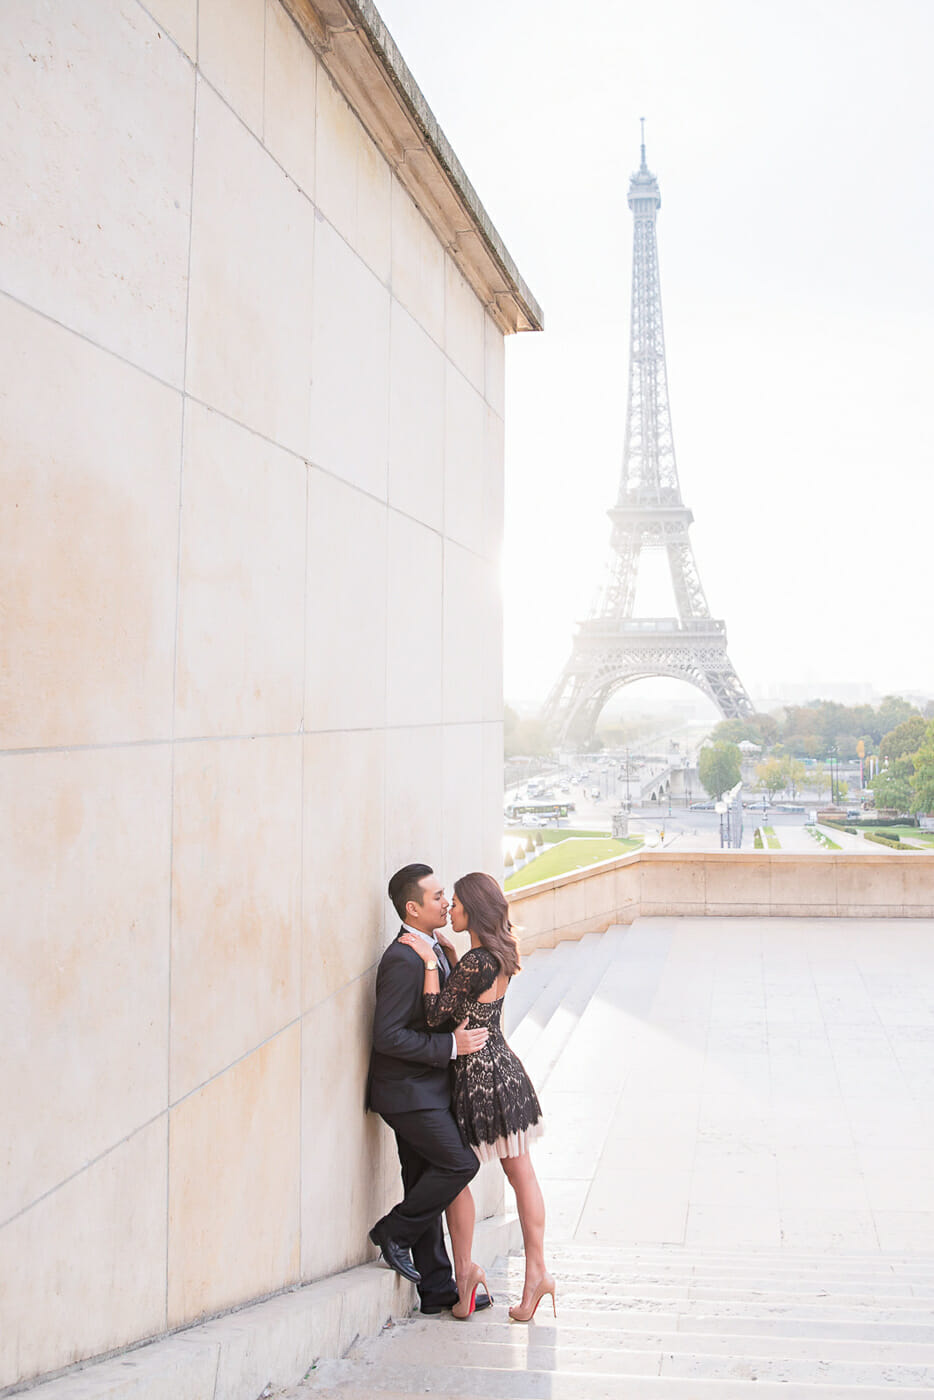 Dreamy Eiffel Tower couple pictures at Trocadero at sunrise